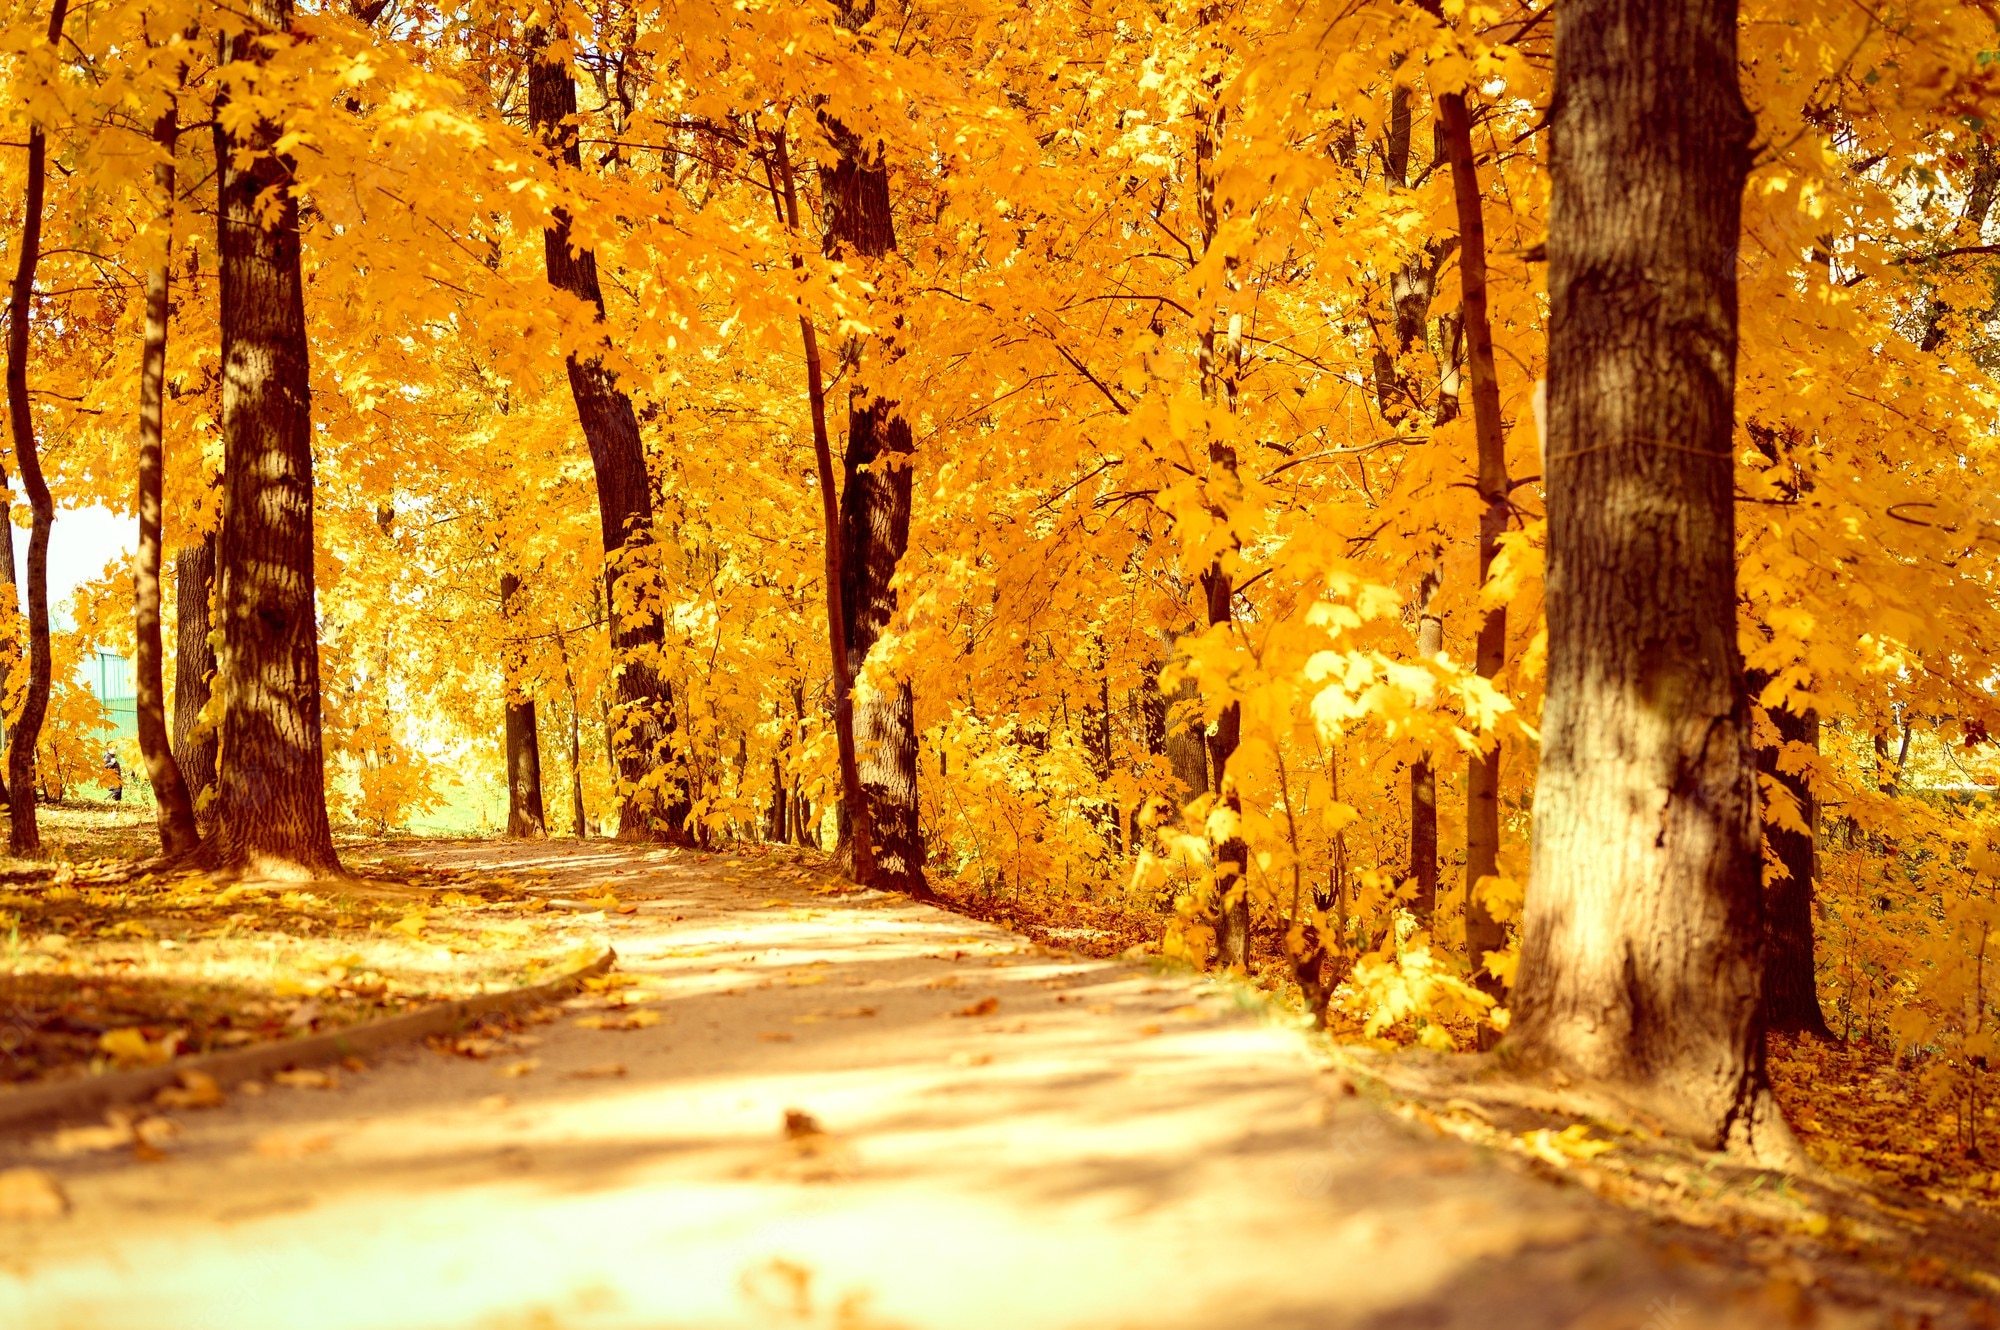 Sunny Autumn Days Wallpapers - Wallpaper Cave